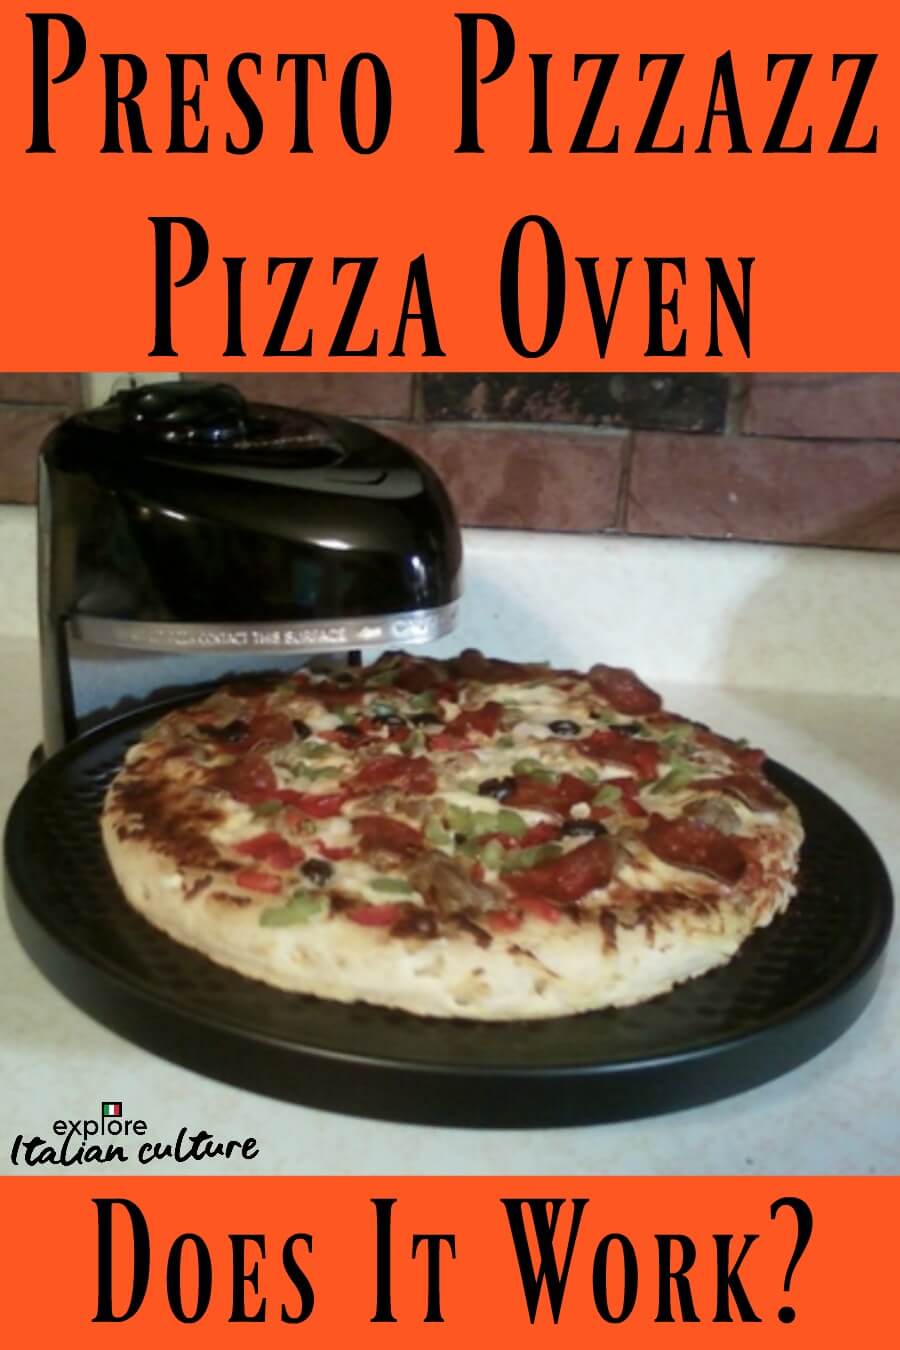 The Presto Pizzazz pizza oven: how does it perform?